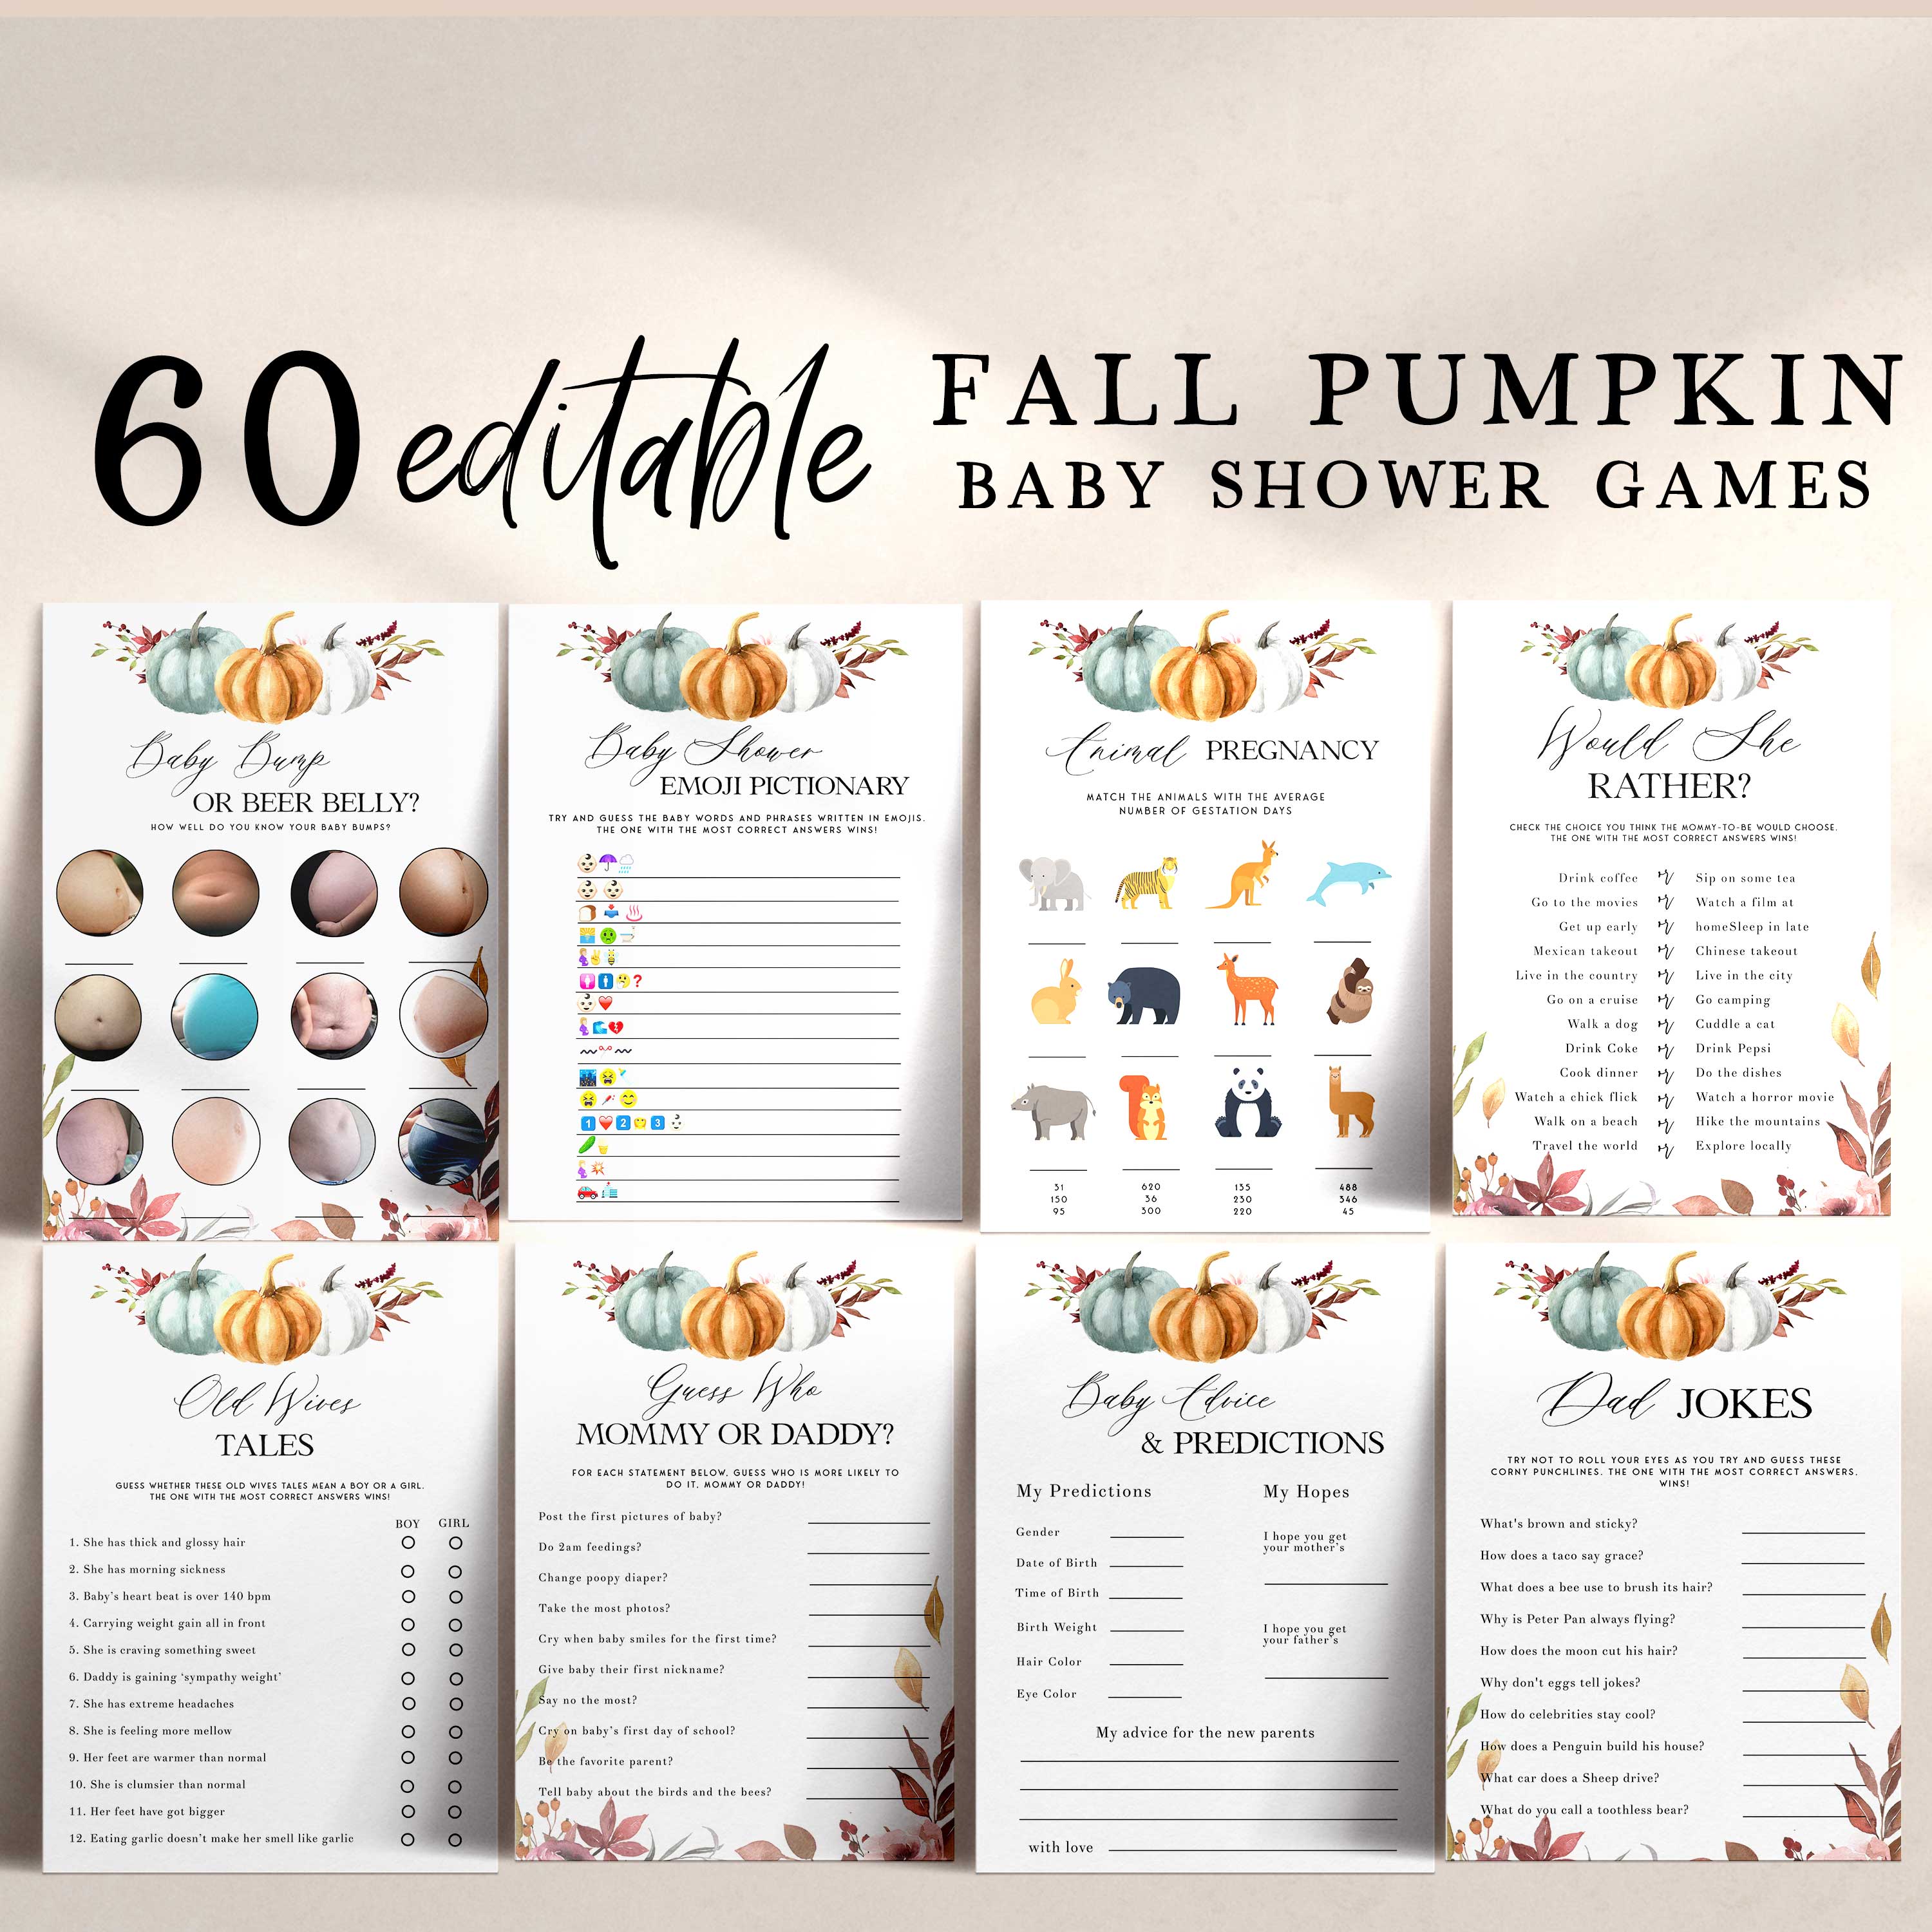 Fully editable and printable 60 baby shower games with a fall pumpkin design. Perfect for a Fall Pumpkin baby shower themed party